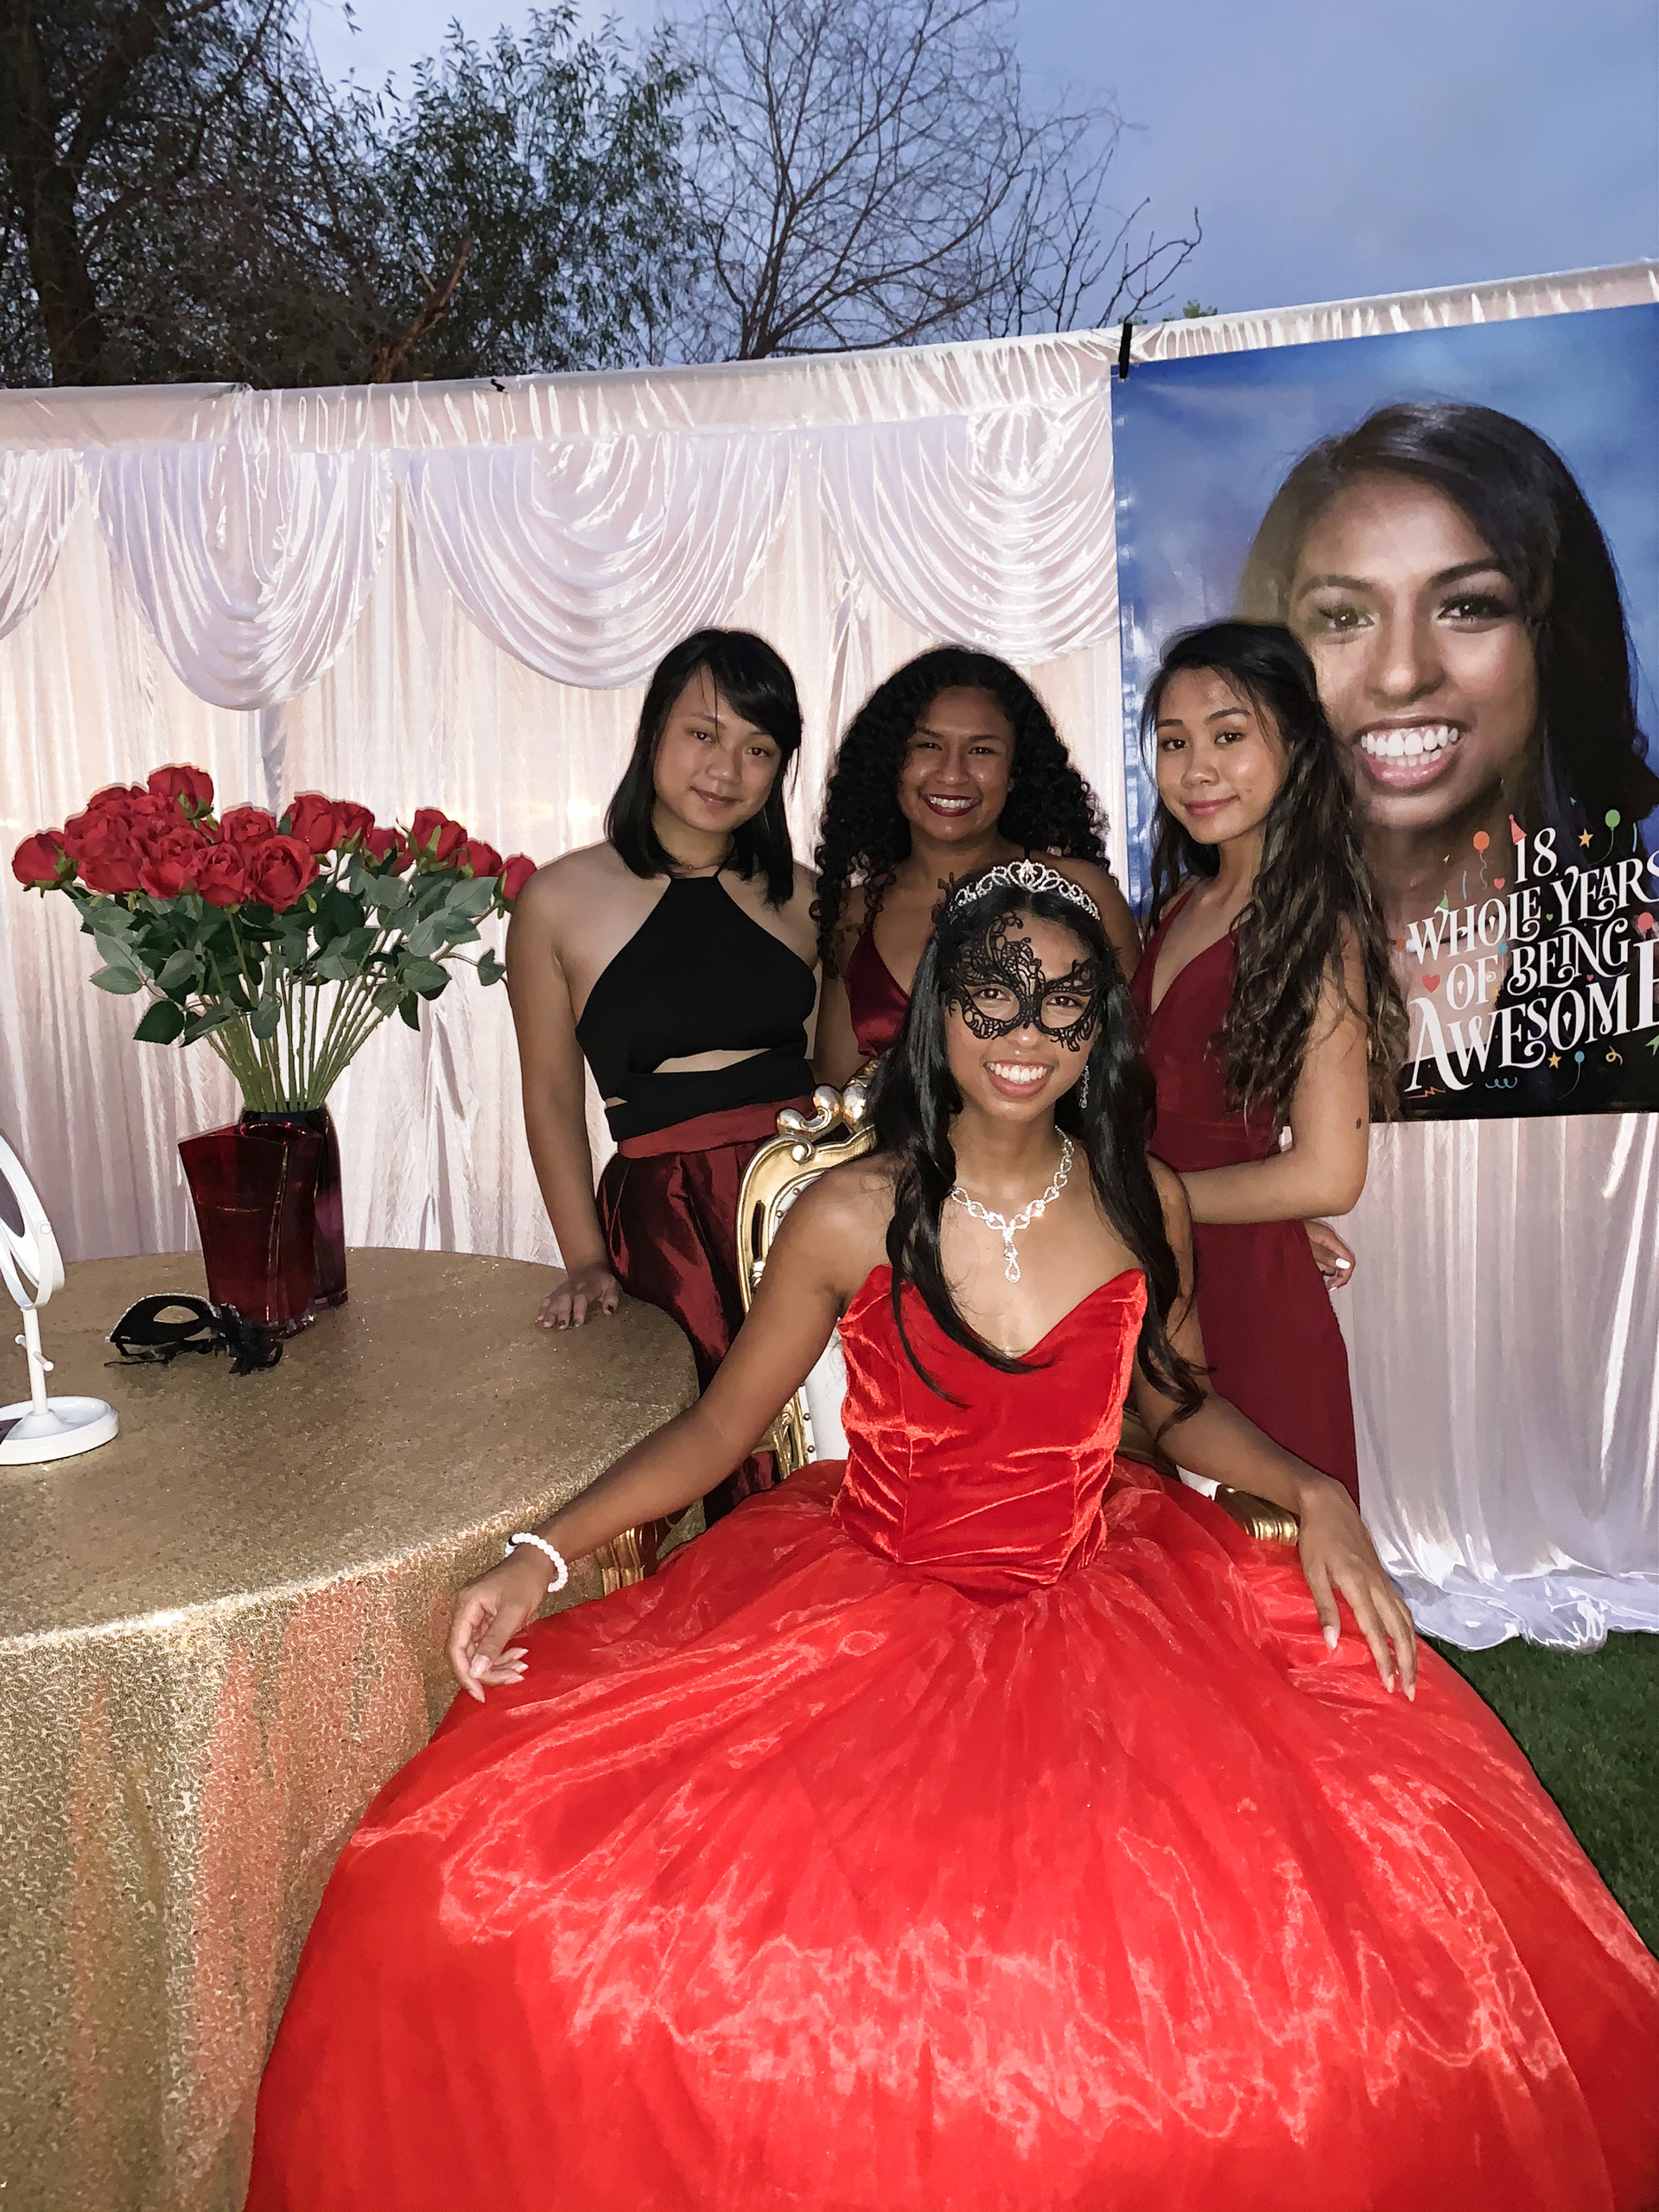 Katelyn Vengersammy in fancy red dress with three girl cousins and red roses behind her for Debut party.